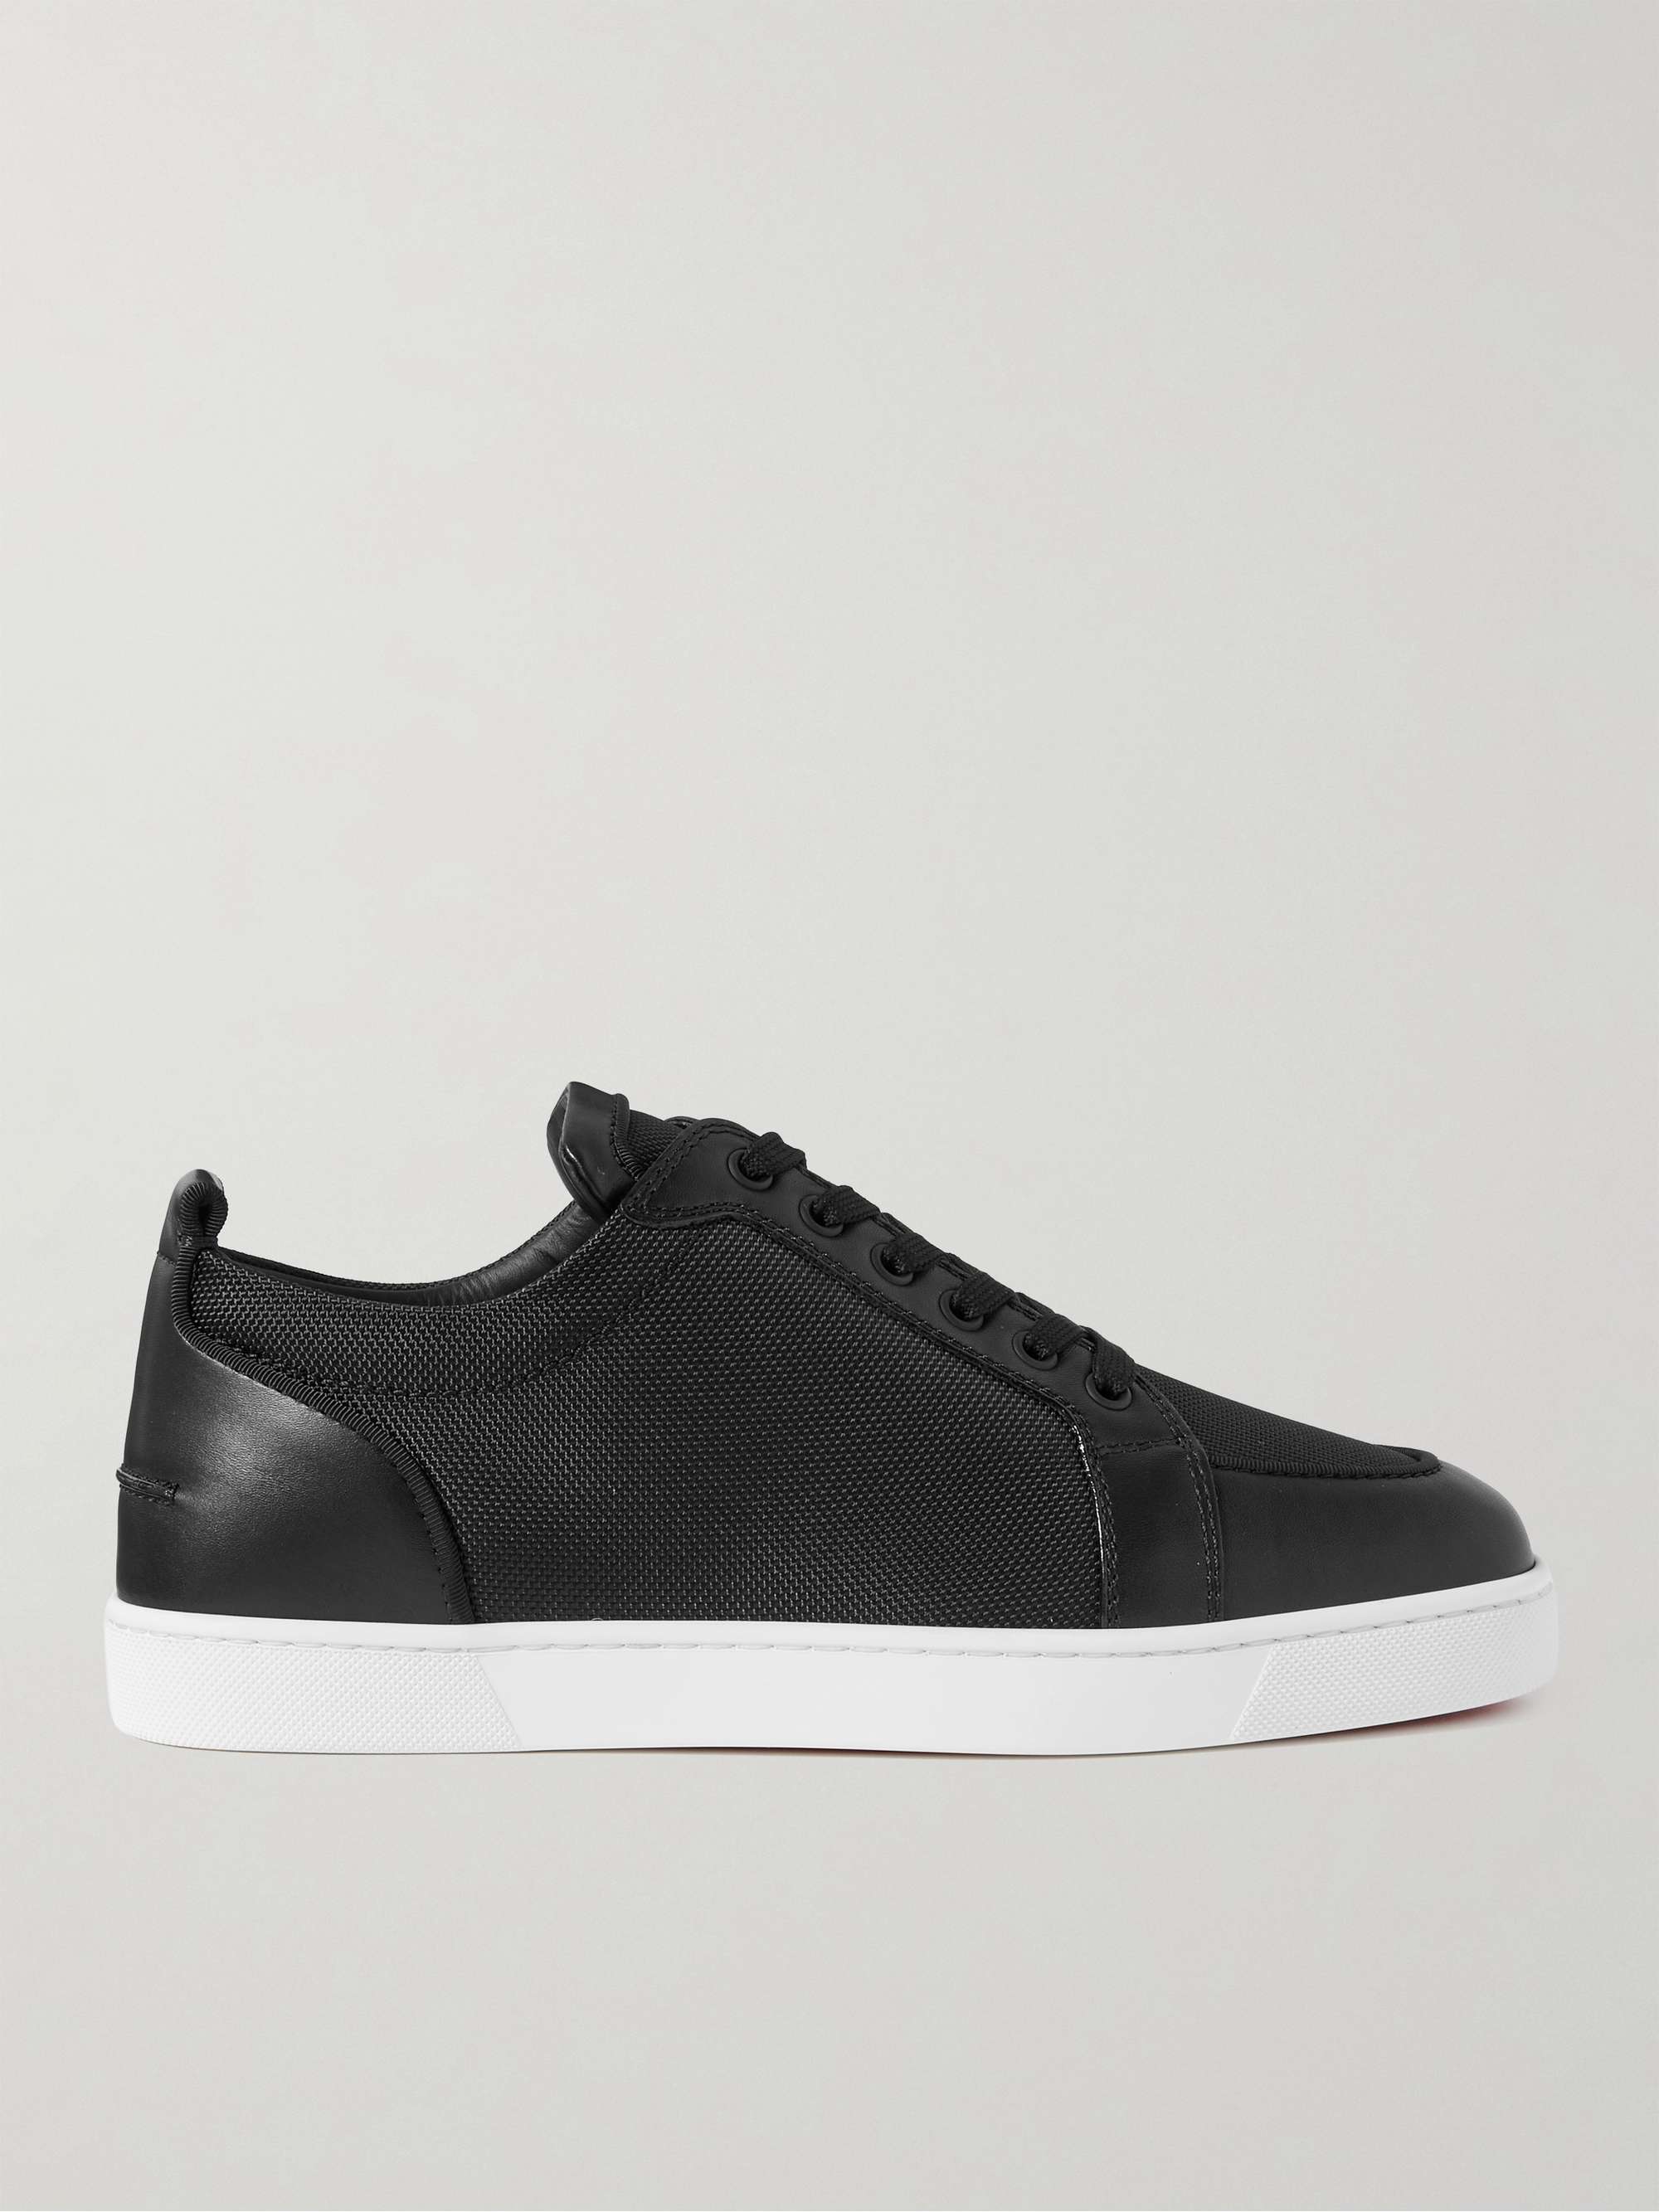 CHRISTIAN LOUBOUTIN Rantulow Leather-Trimmed Mesh Sneakers